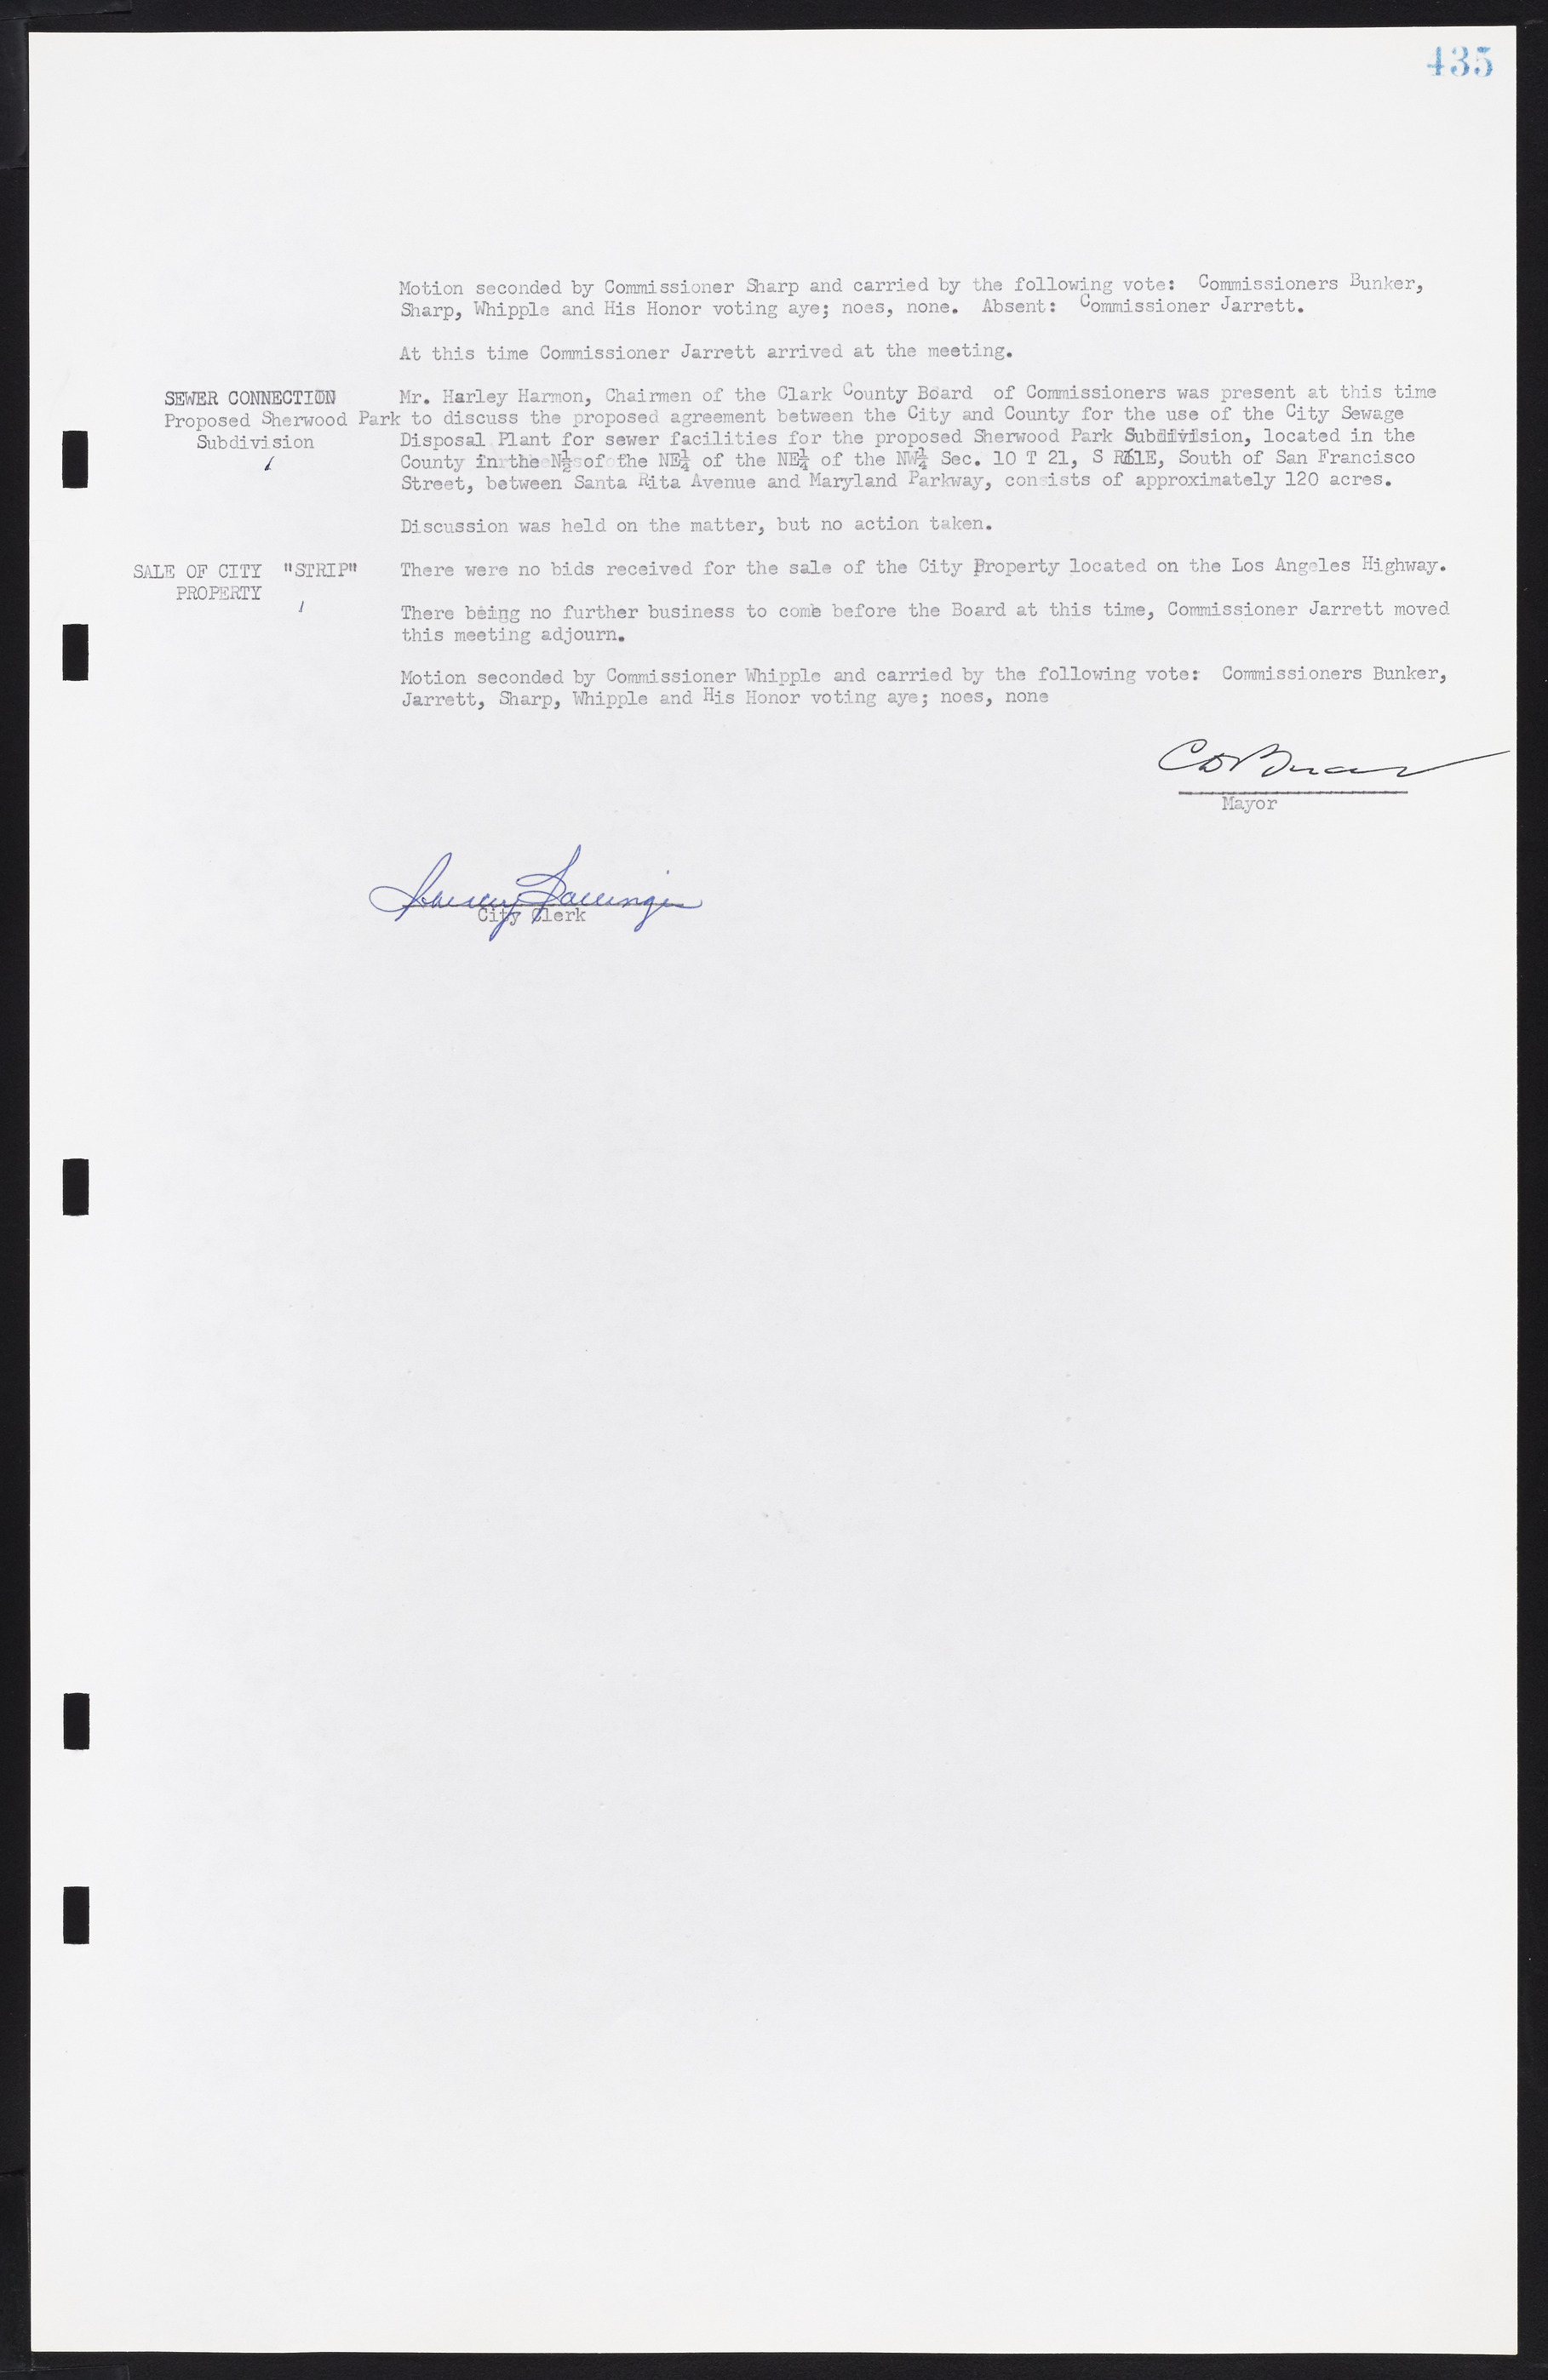 Las Vegas City Commission Minutes, May 26, 1952 to February 17, 1954, lvc000008-465